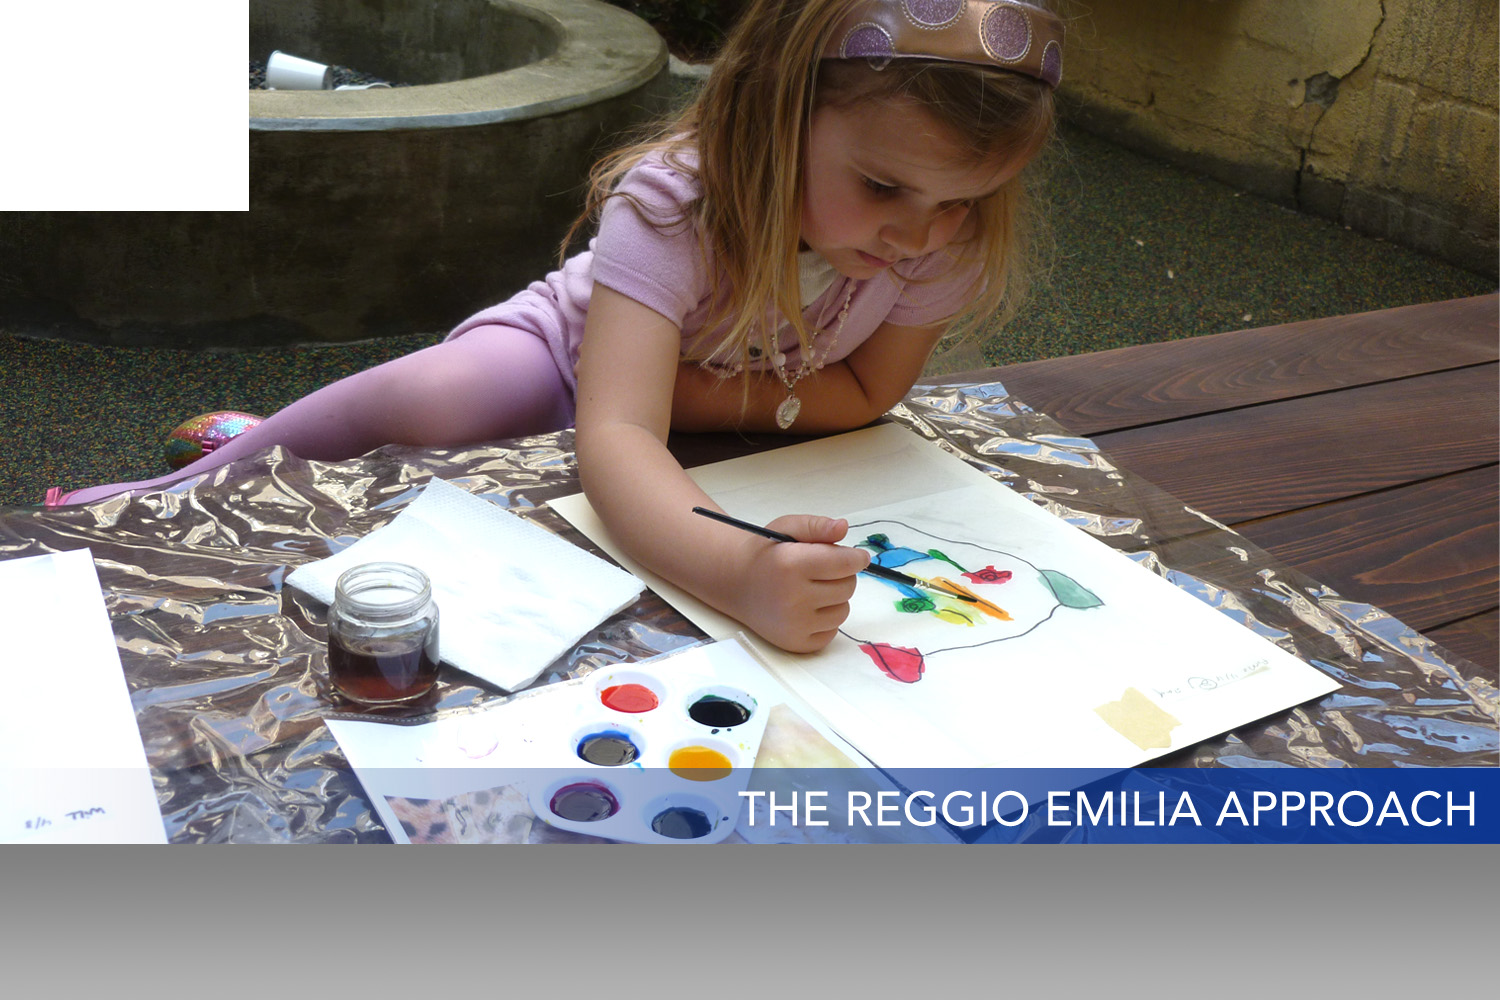  Time, and how children and adults use it, is central to the Reggio philosophy. The rhythm and pace of the child are always given overriding importance. This means really having time for children's ideas and giving value to their work, their conversa